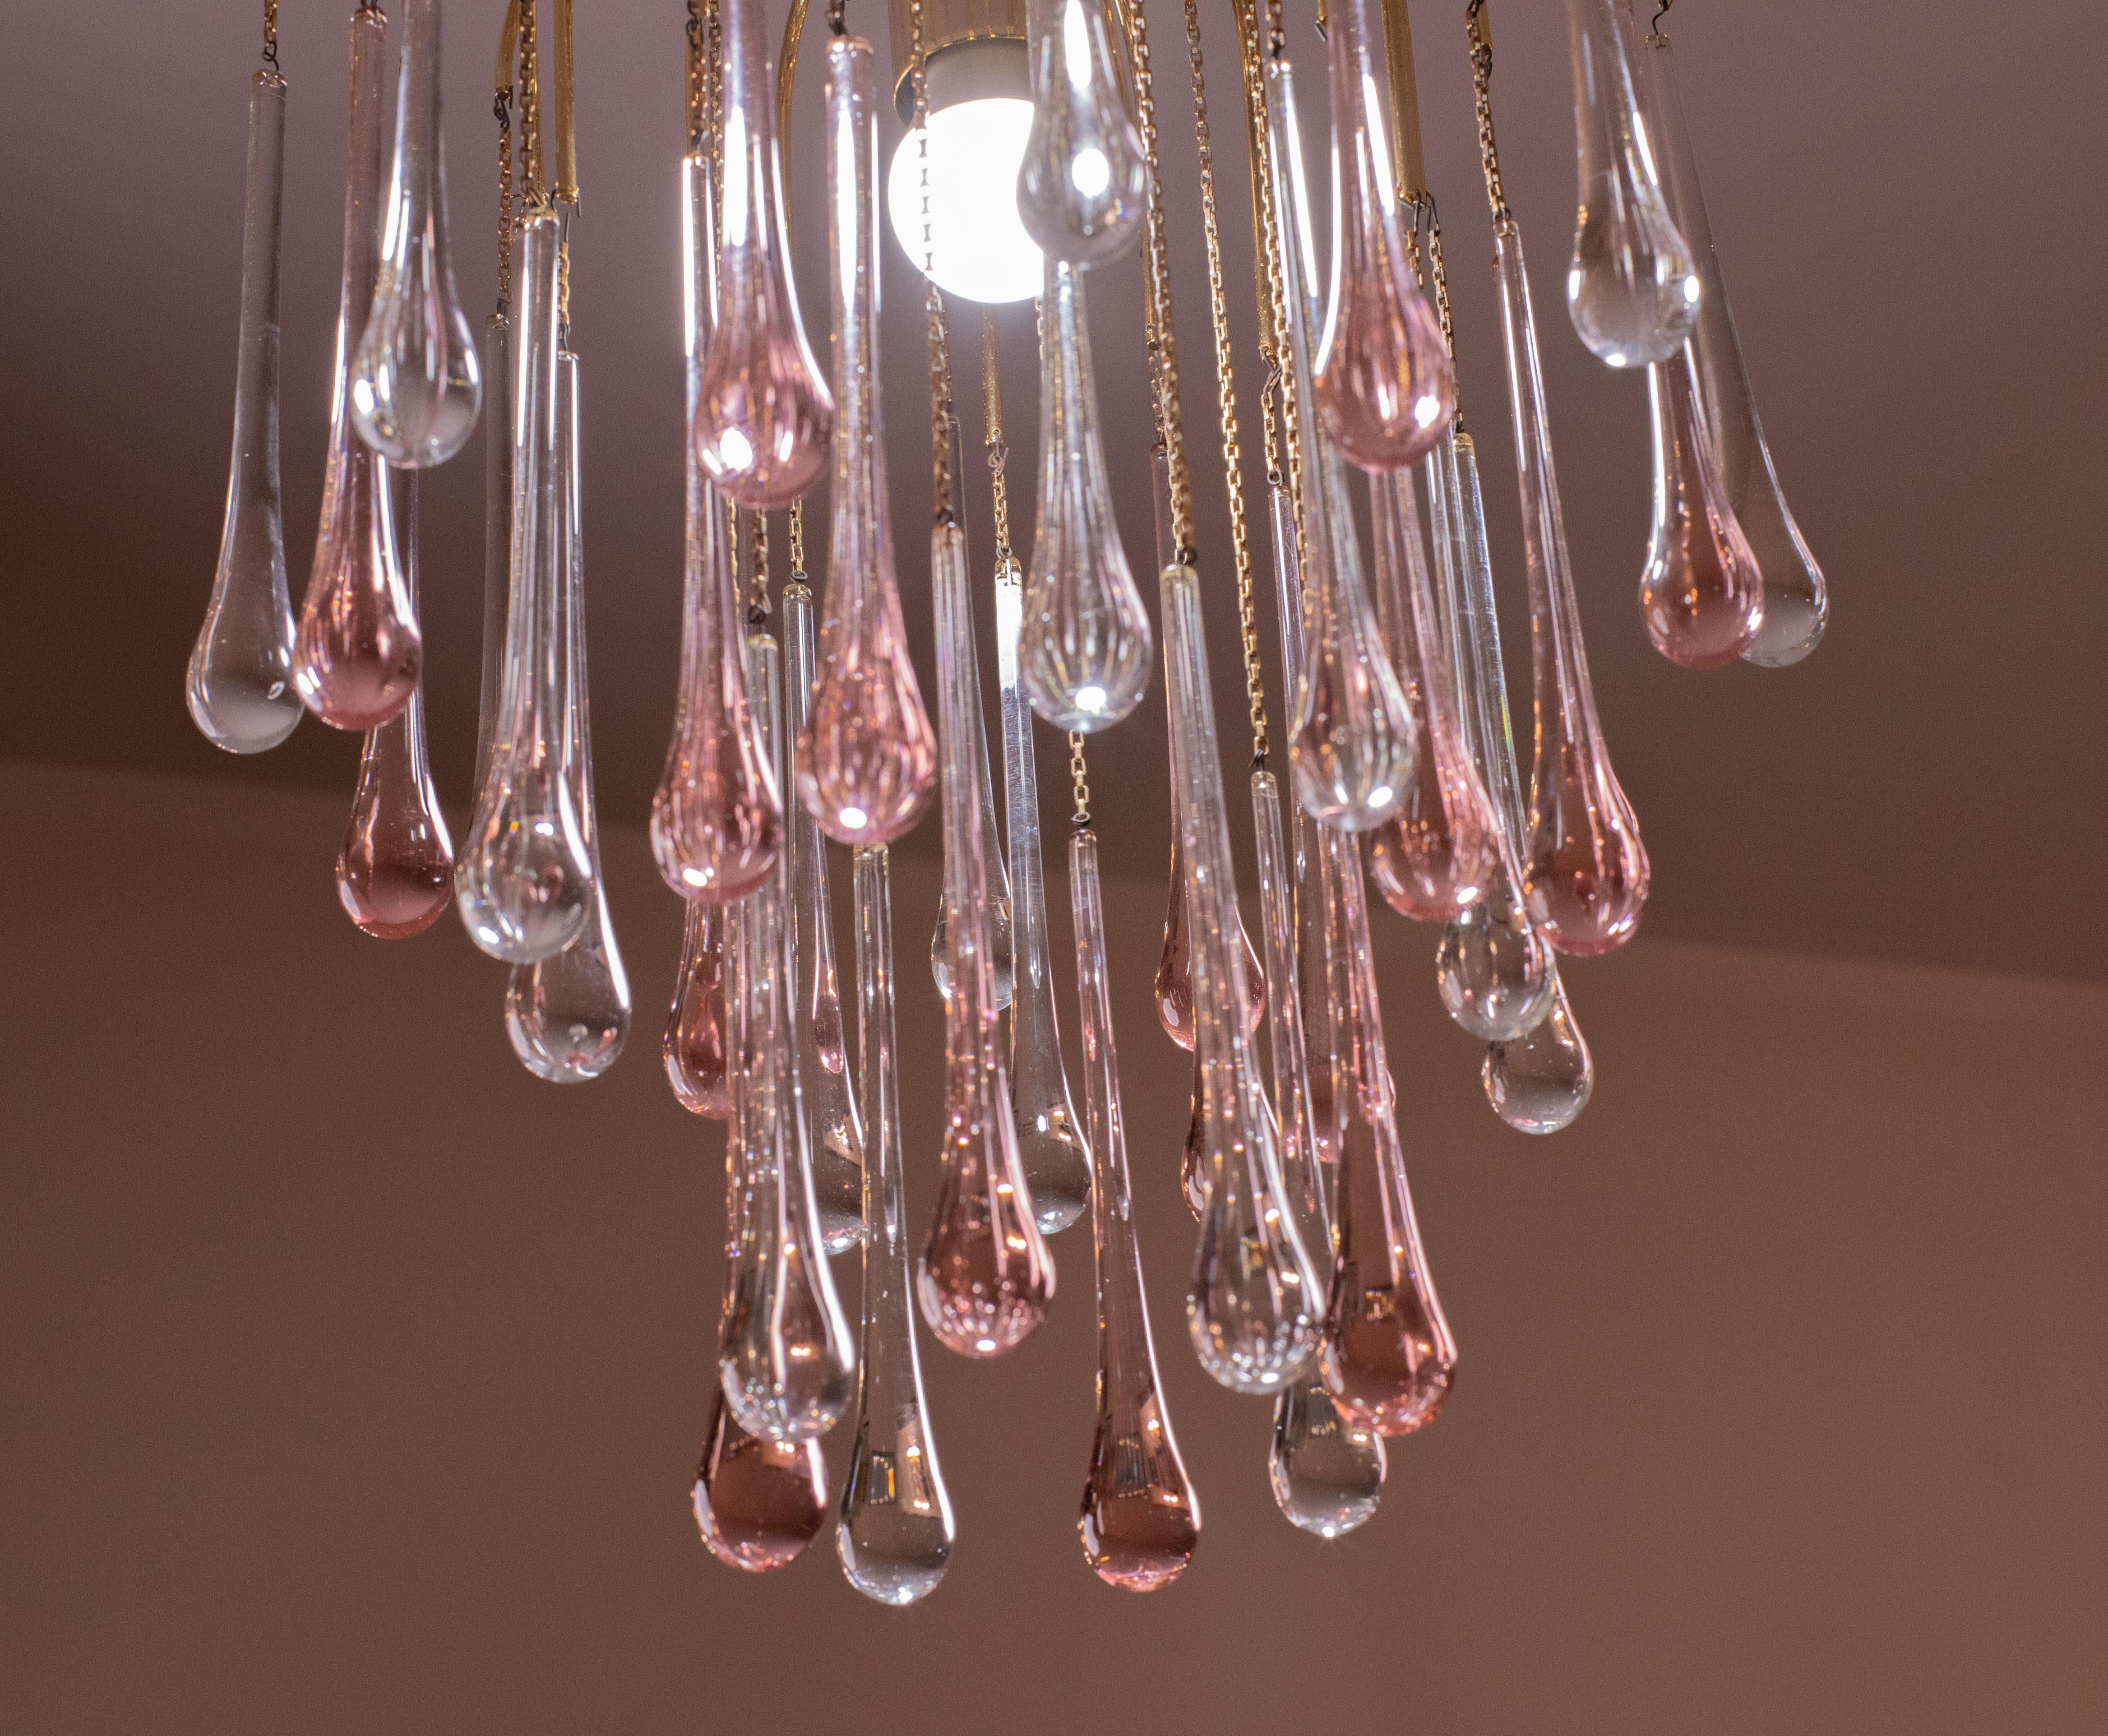 Gorgeous Murano chandelier in the style of Venini La Cascata.
The chandelier consists of three rounds composed of beautiful transparent and pink drops cascading down.
The chandelier consists of 1 e27 light points, the frame is in gold bath, in